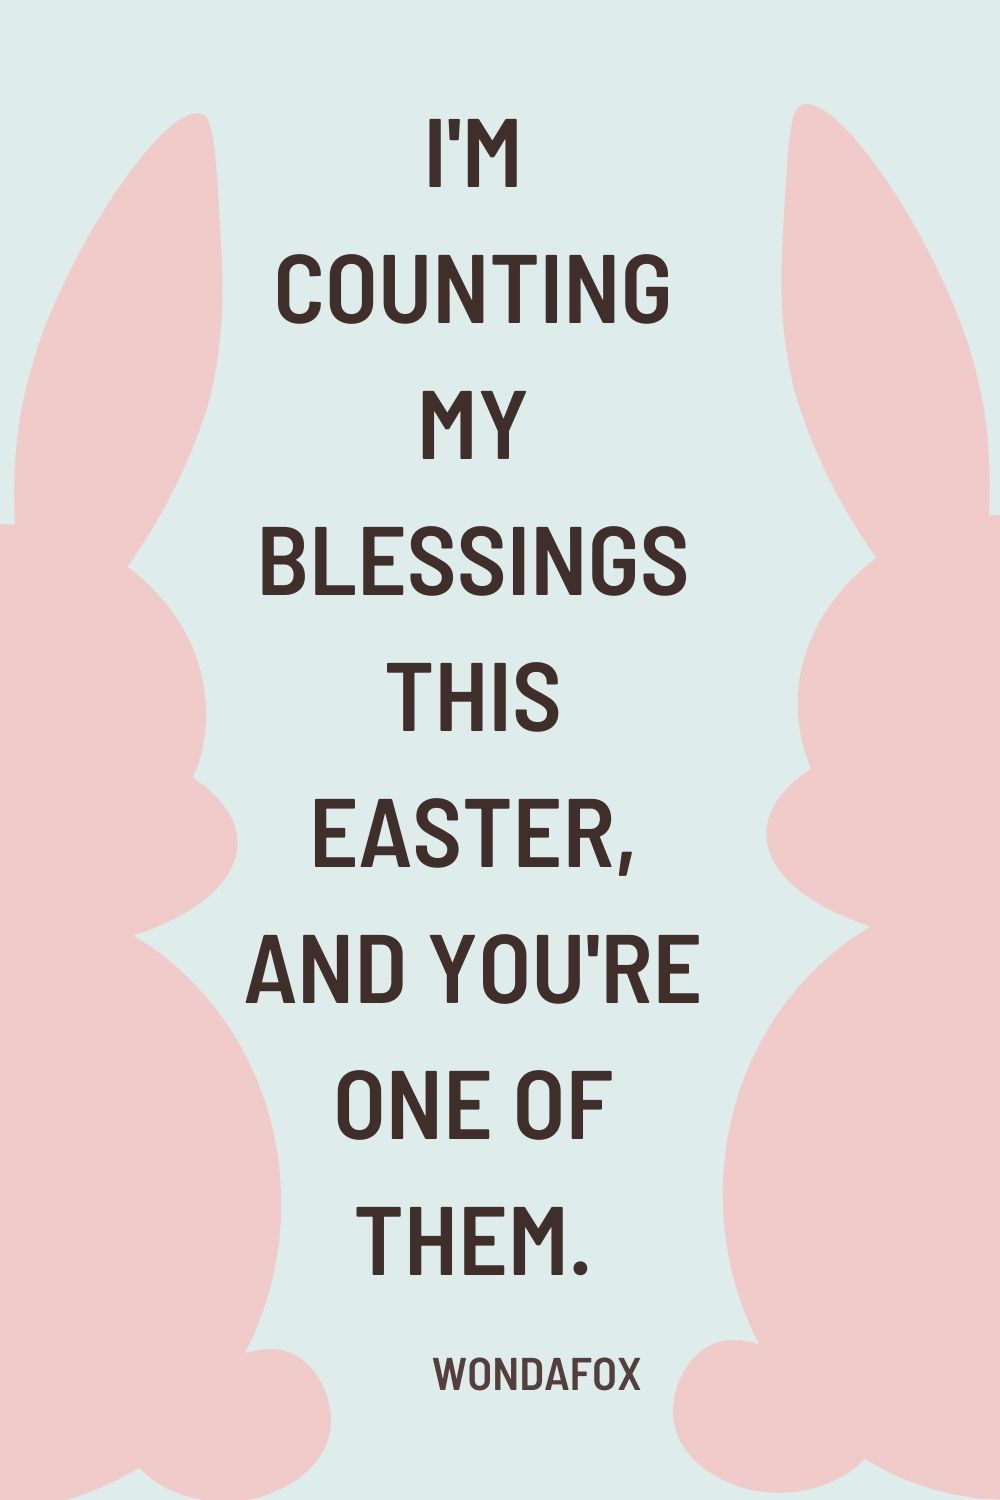 I'm counting my blessings this Easter, and you're one of them.